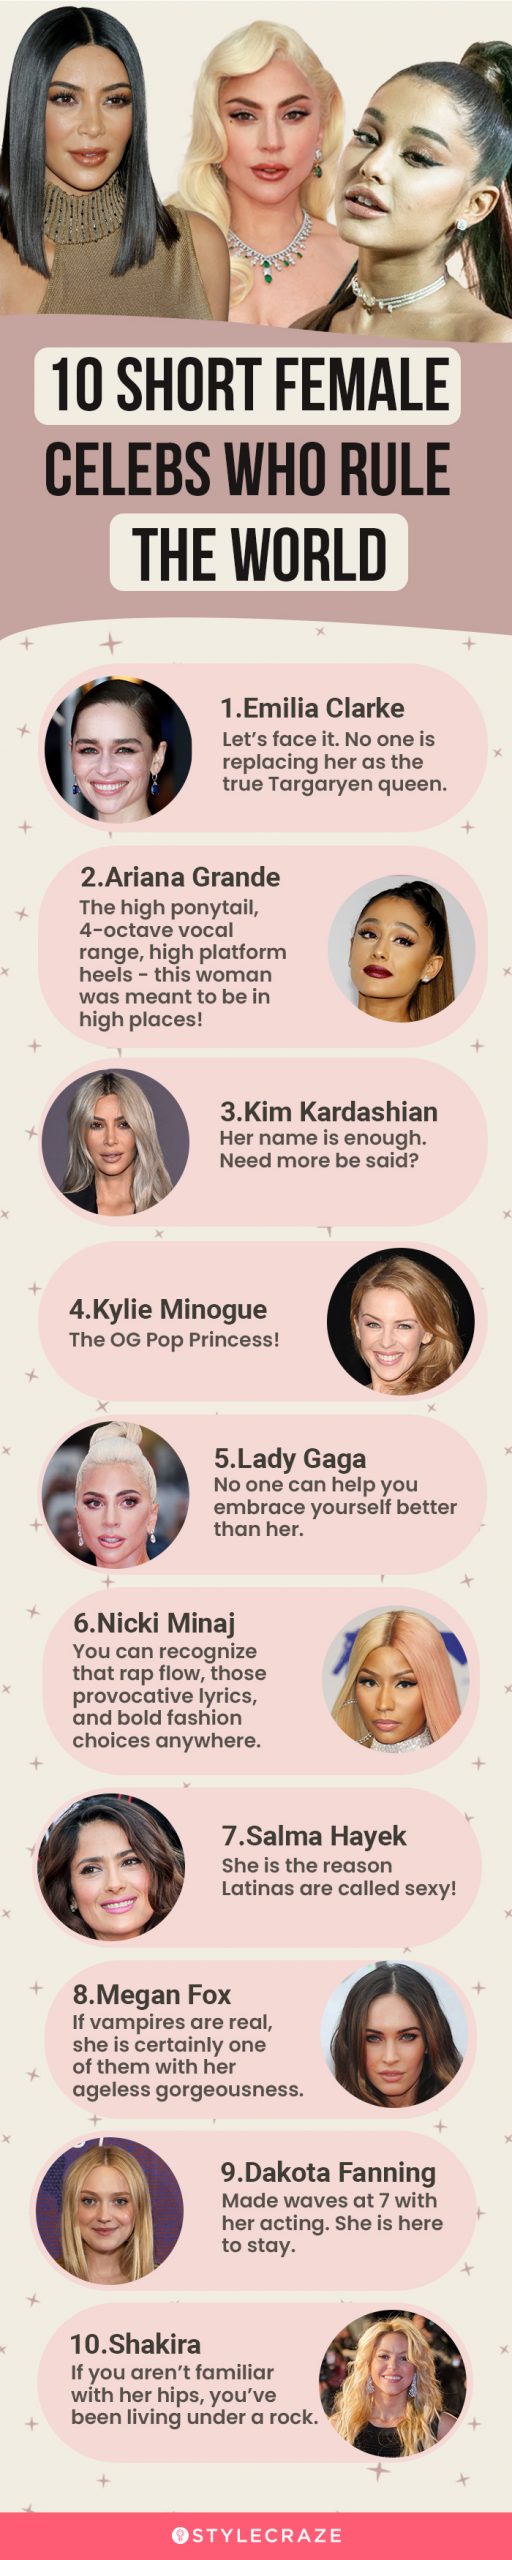 10 short female celebs who rule the world (infographic)